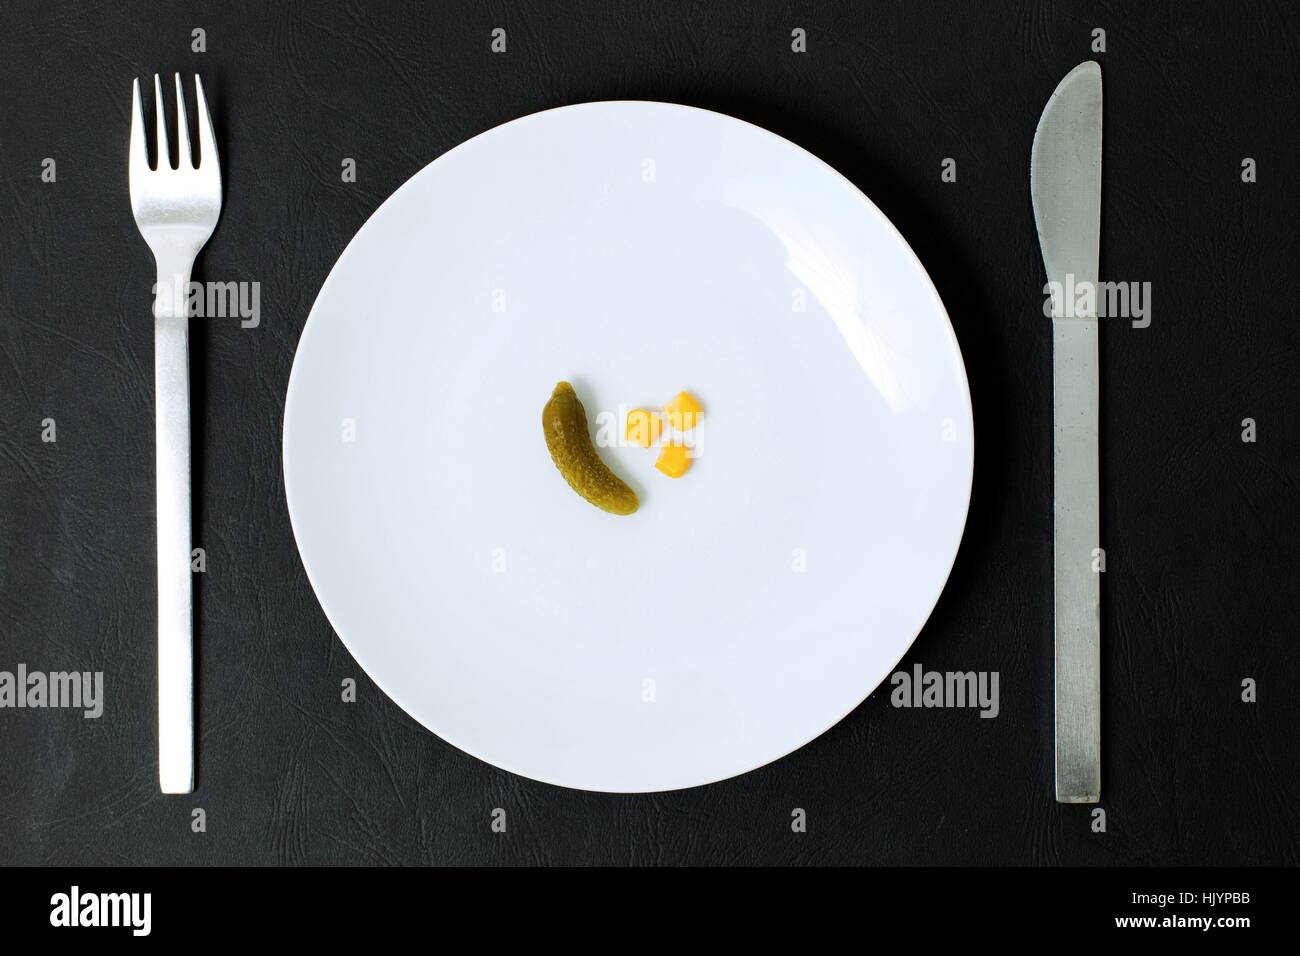 symbol photo for going on a diet - nearly empty plate captured in topview perspective | usage worldwide Stock Photo